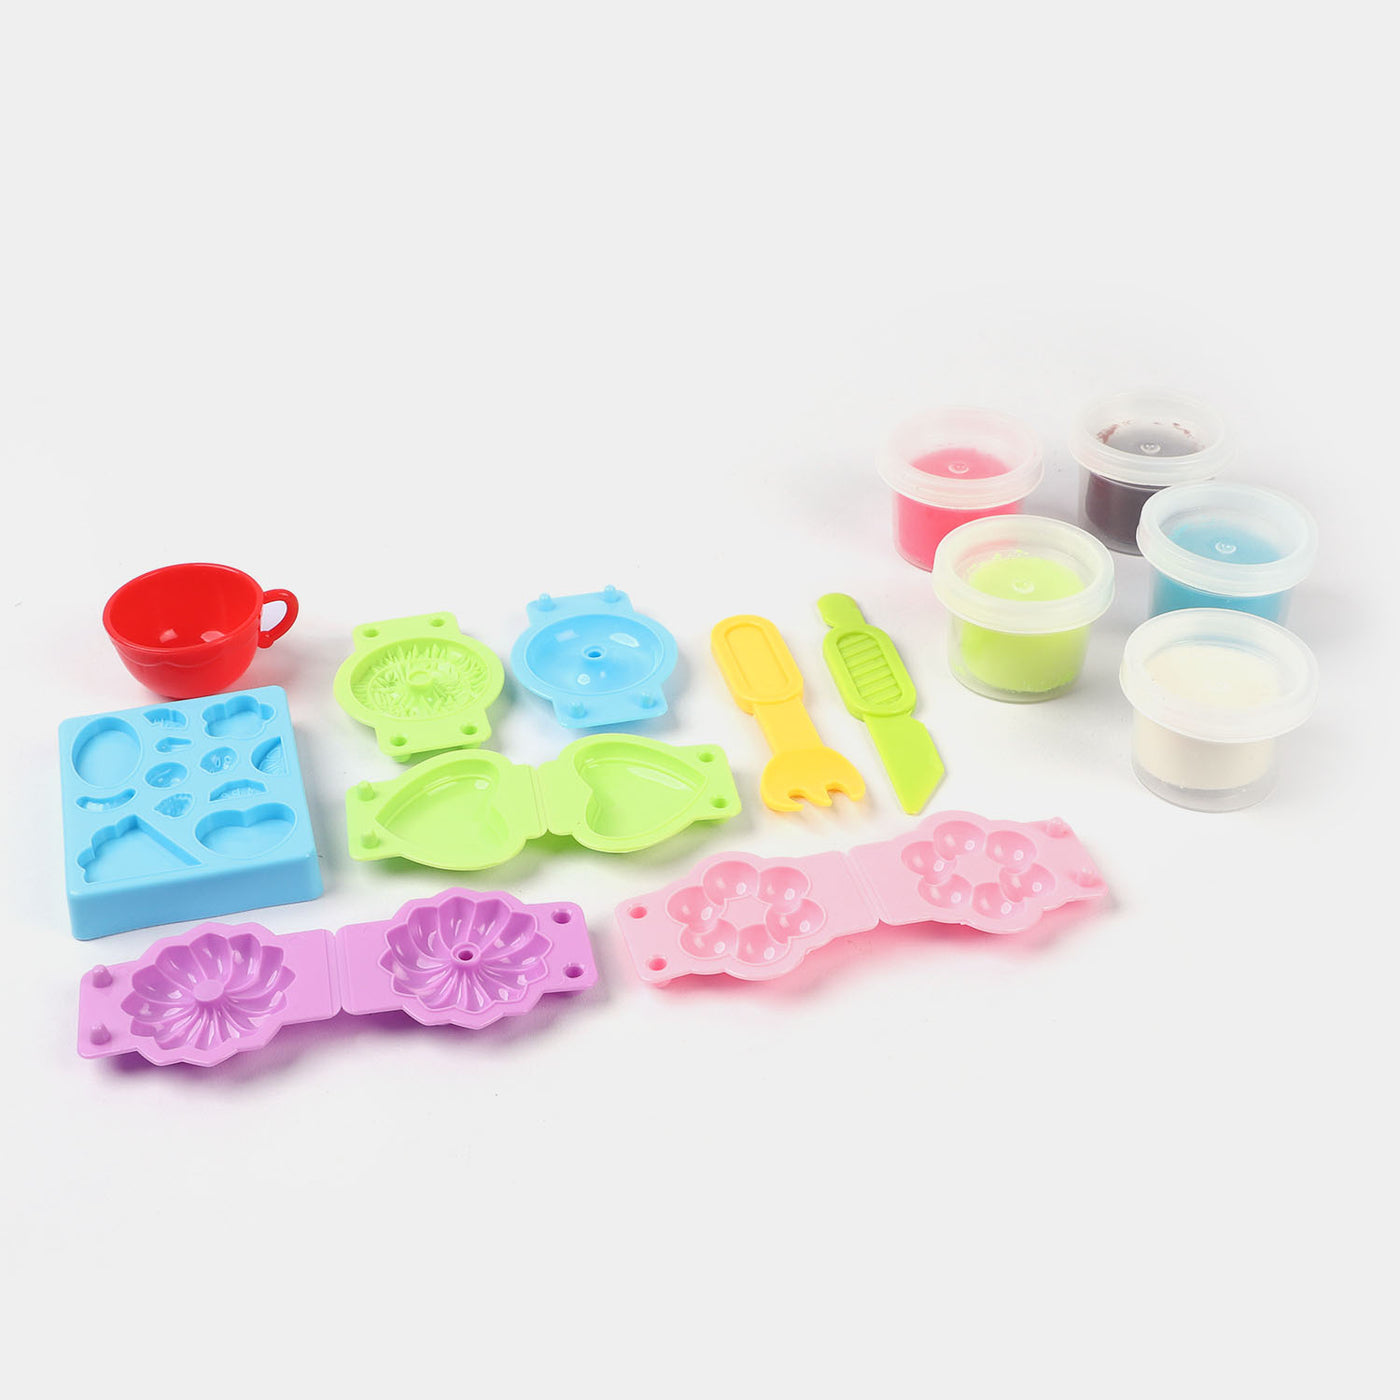 Delicious Pastries Clay Play Set For Kids